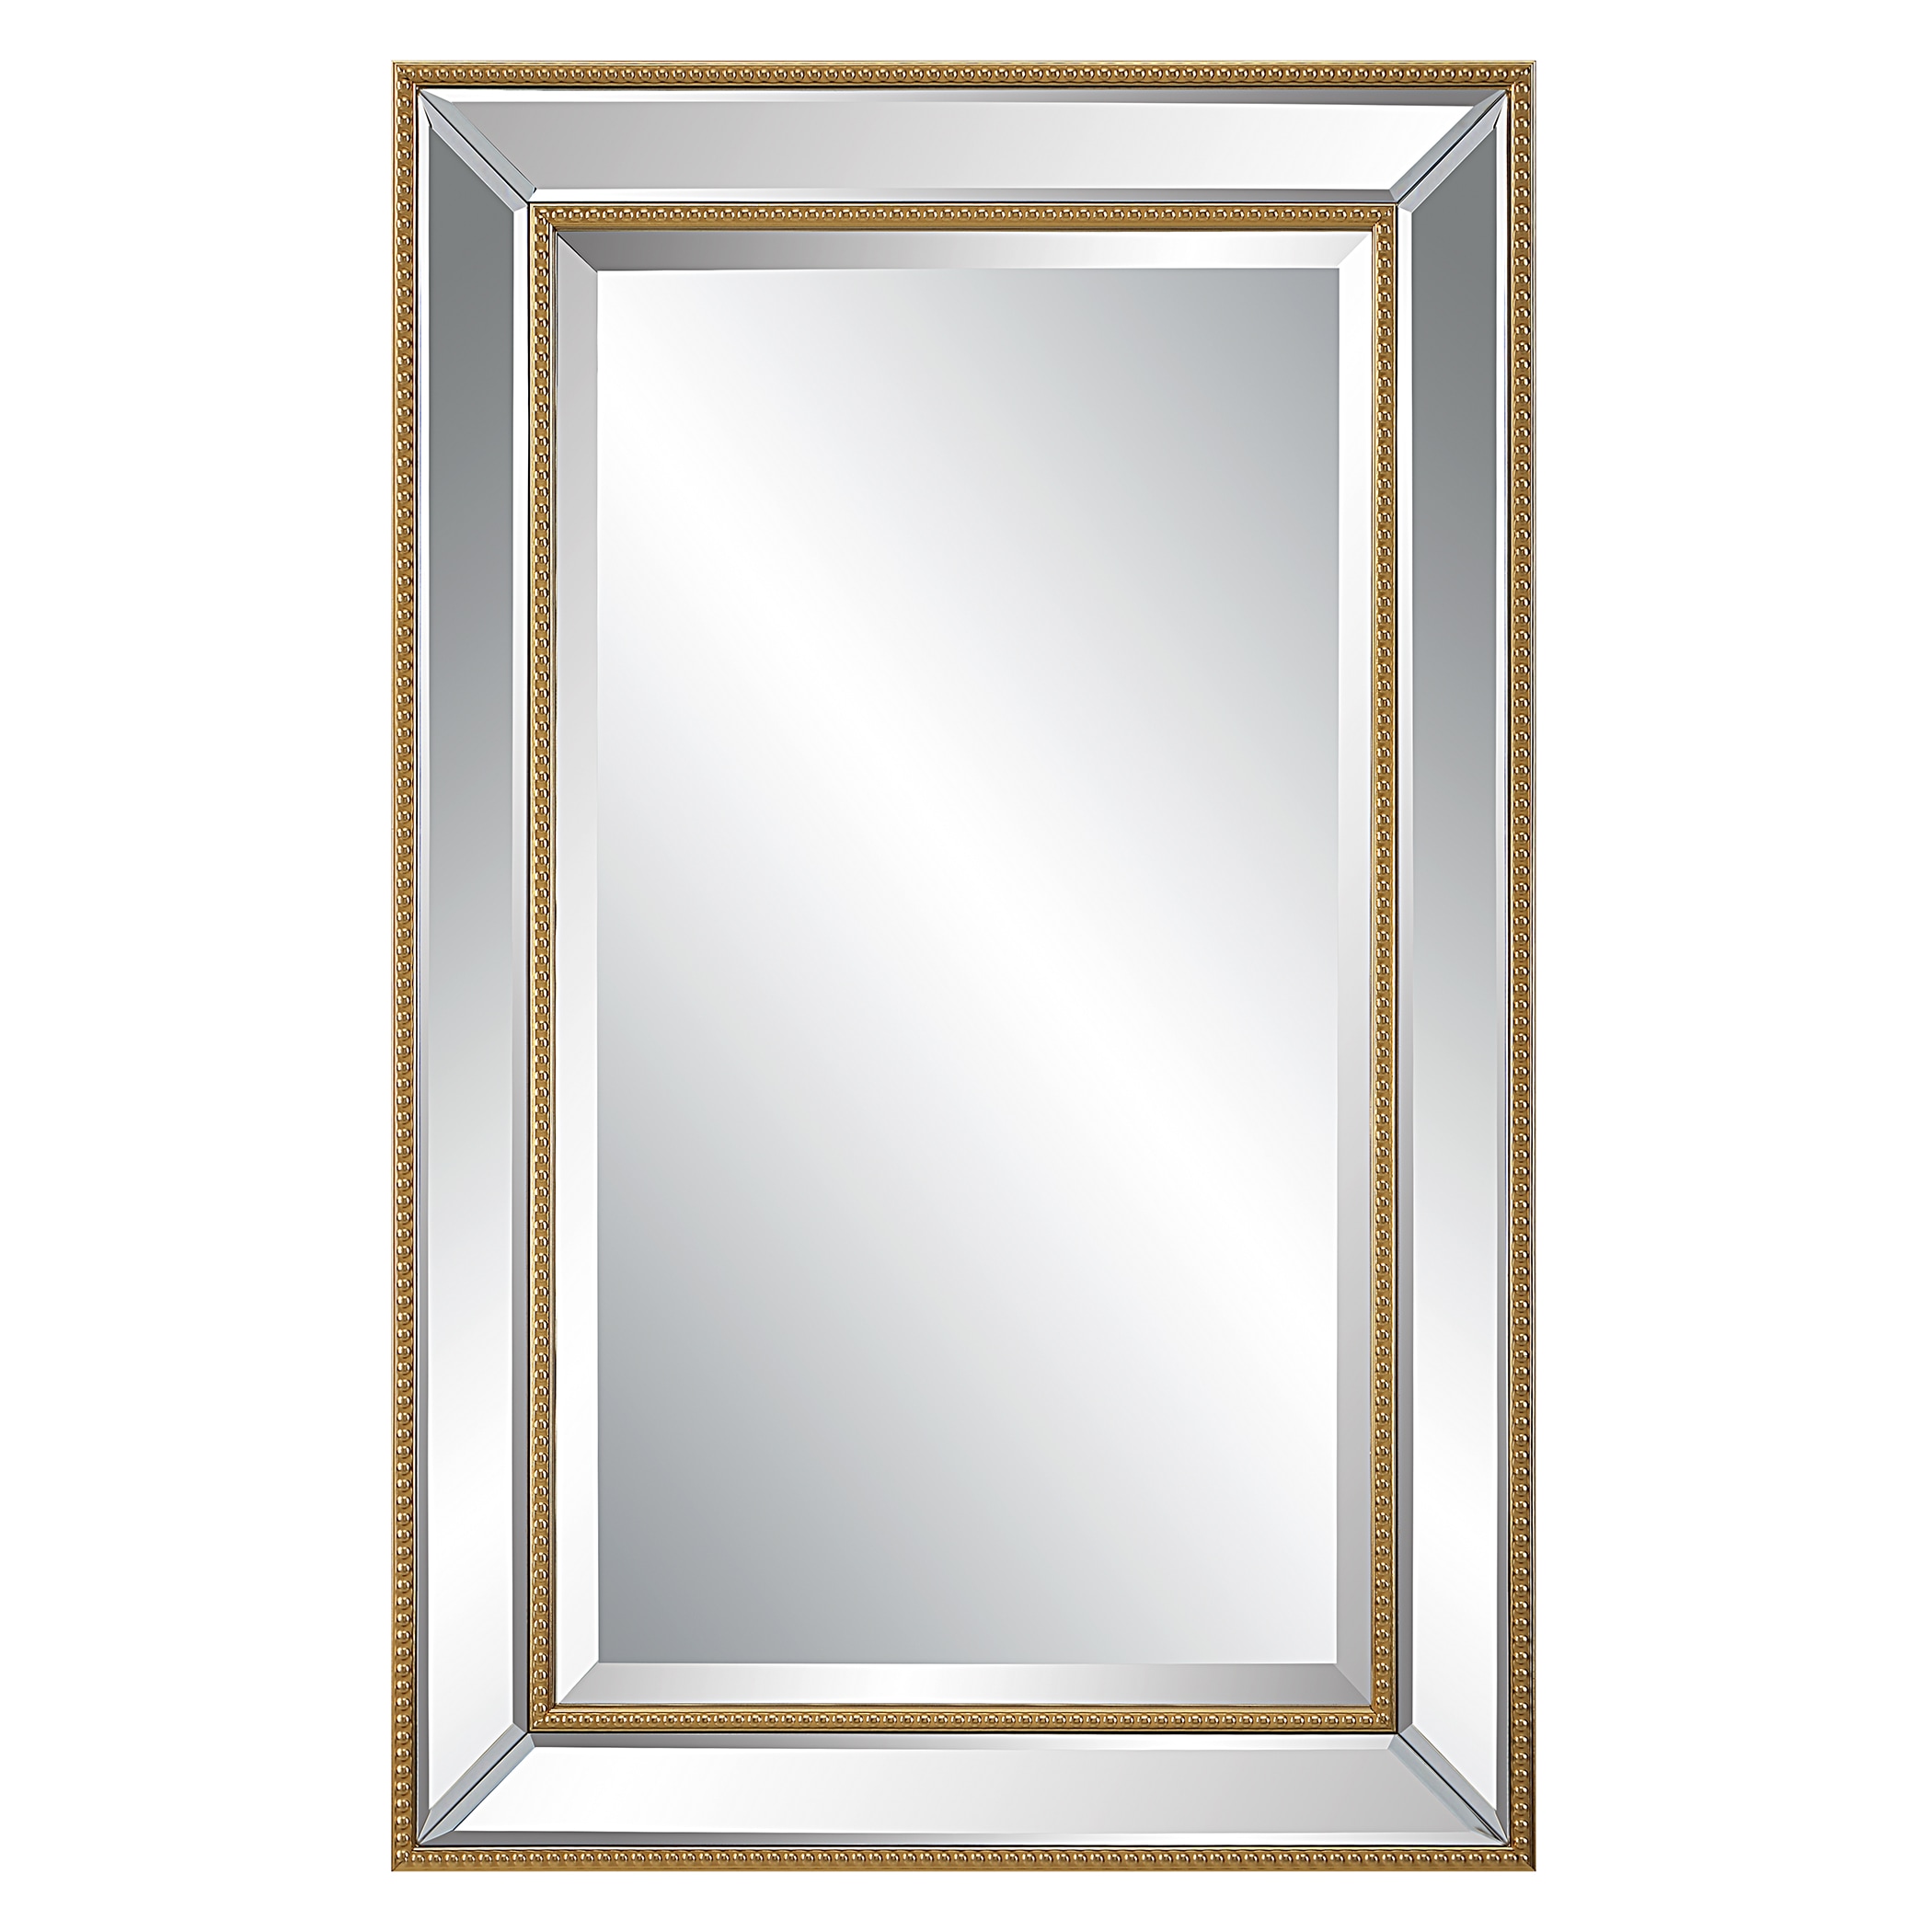 White Carved Exclusive Mirror Frames, Size/Dimension: 2.5 Feet at